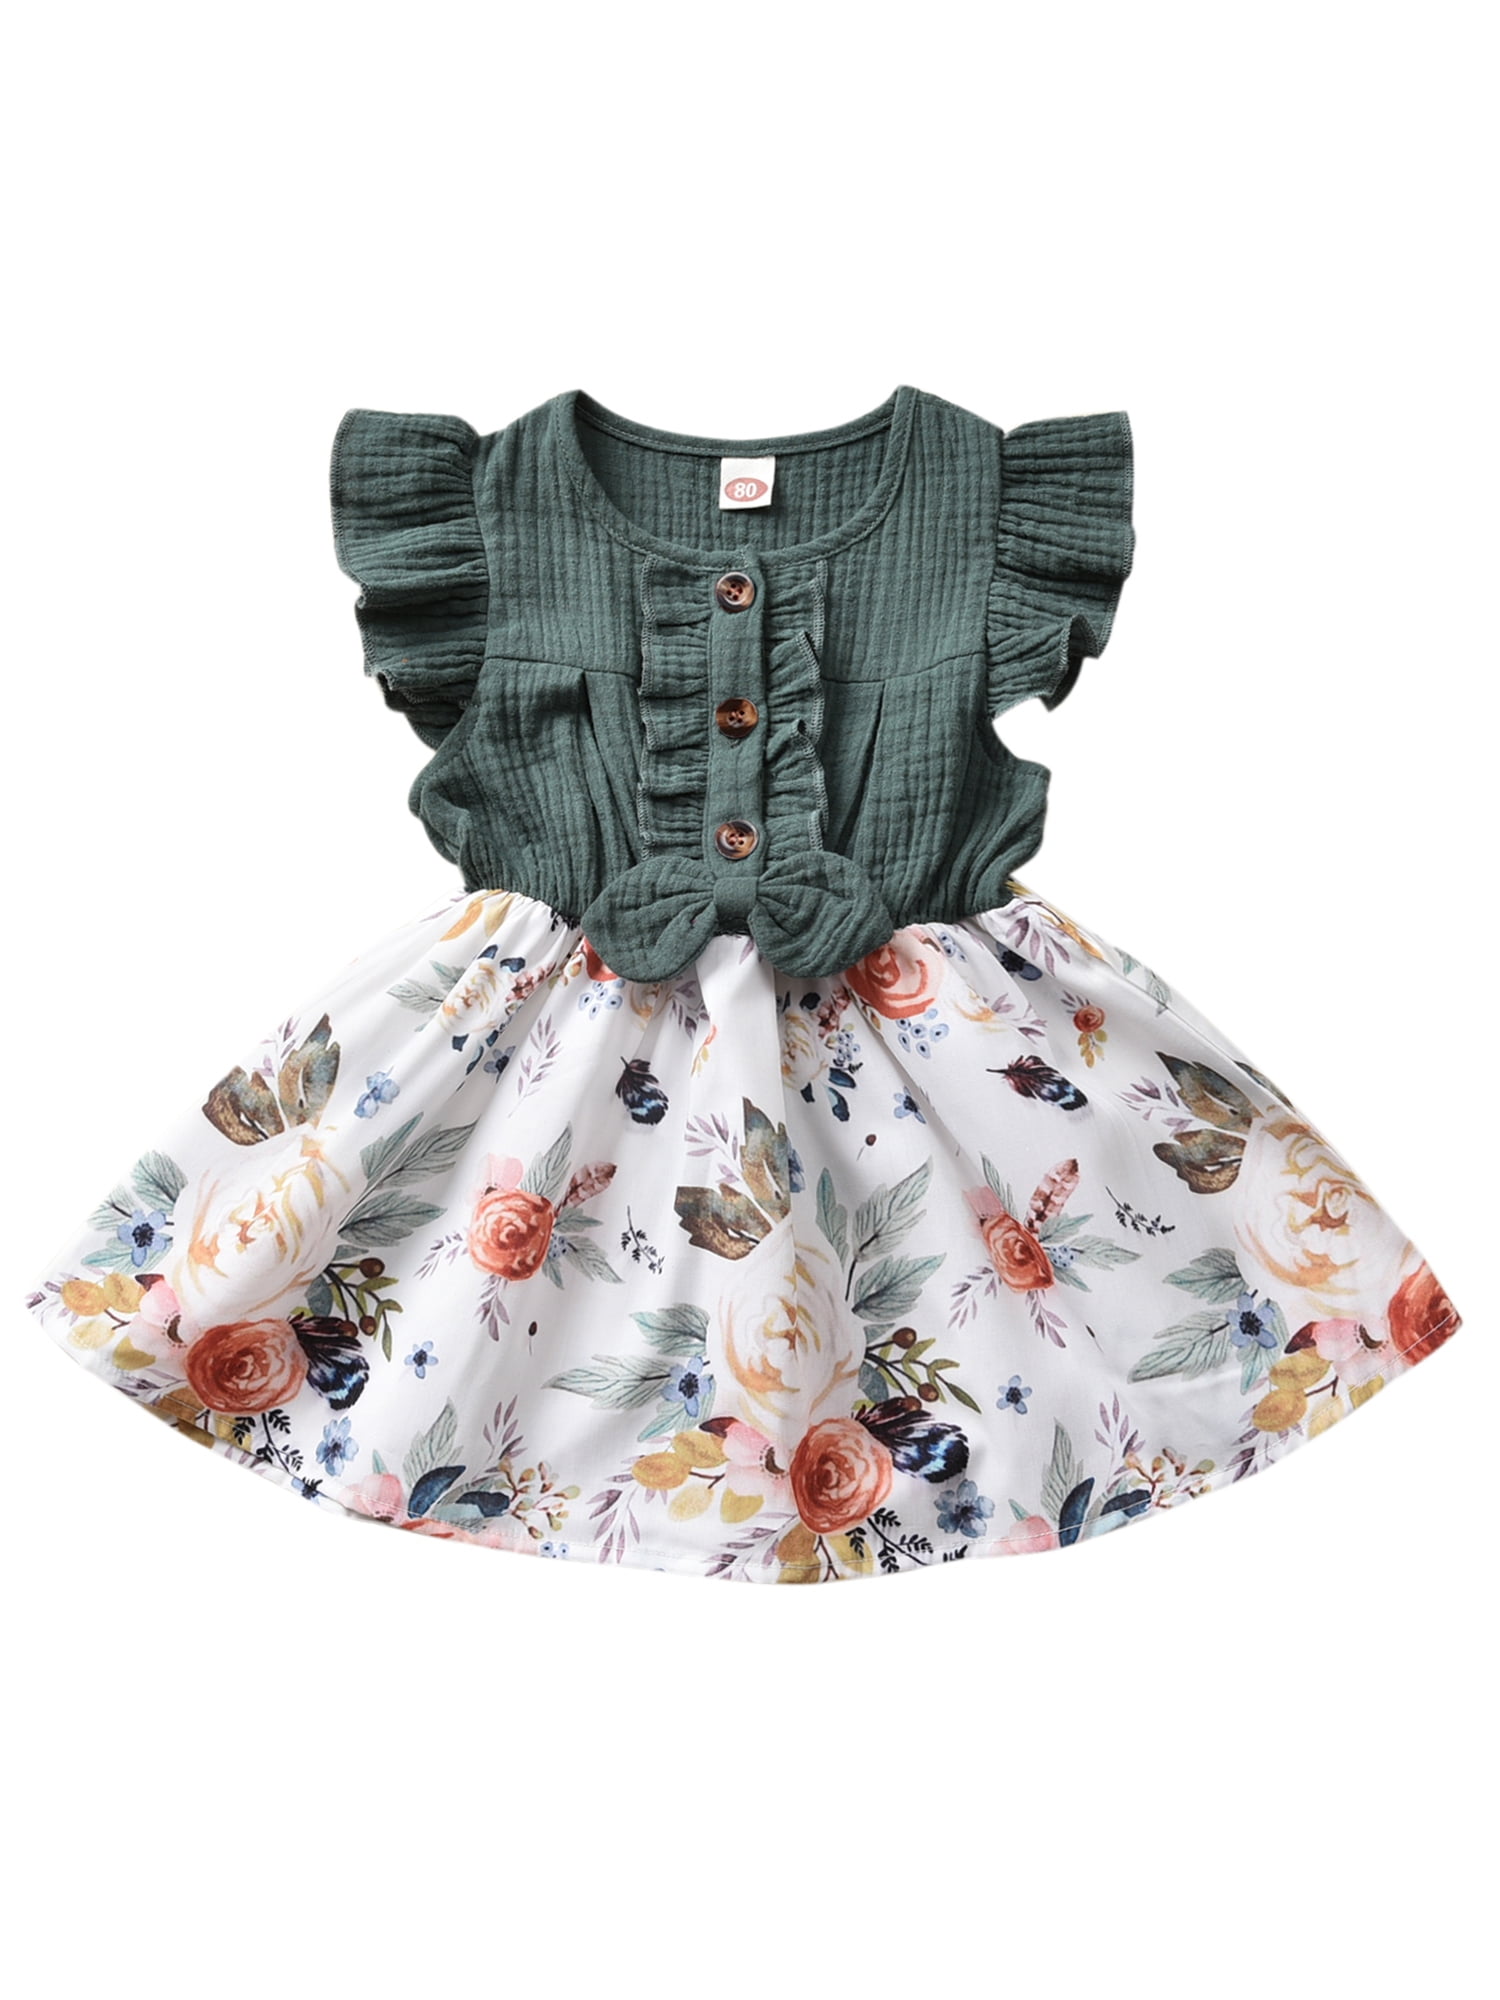 Toddler Baby Girls Floral Dress Princess Ruffled Sundress Clothes Party Casual